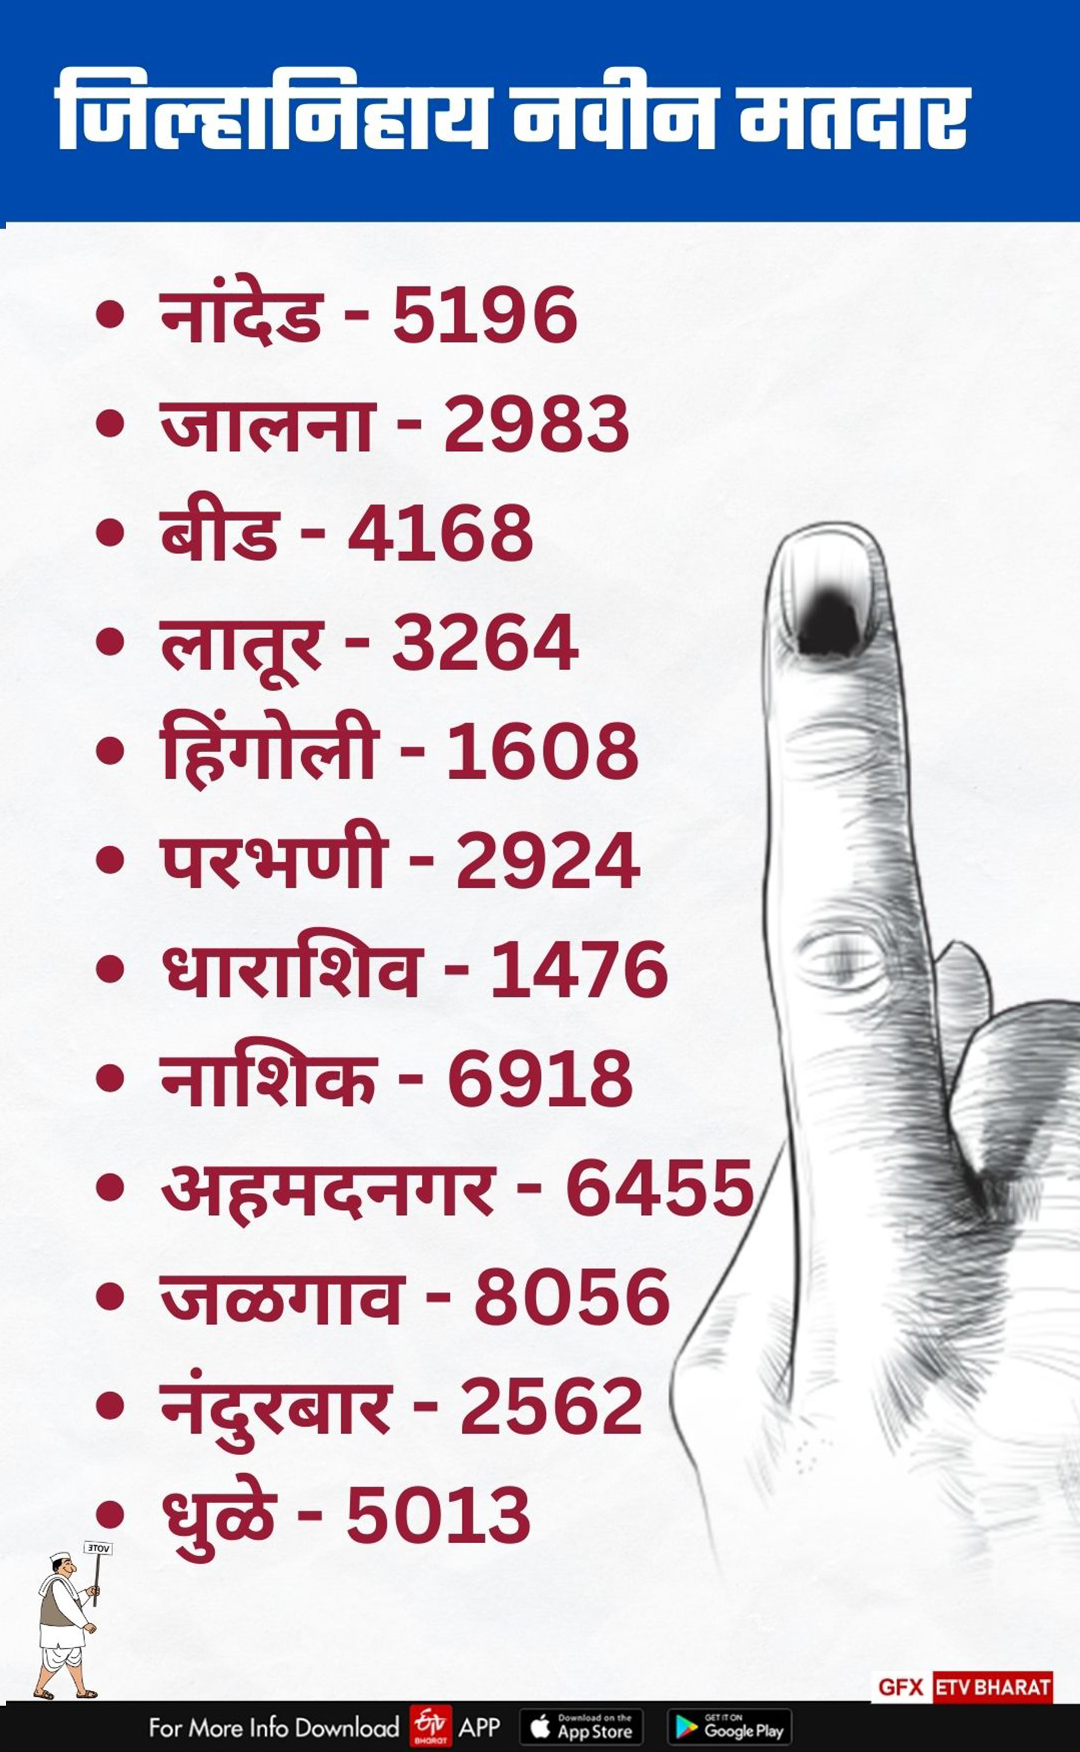 New Voters Number